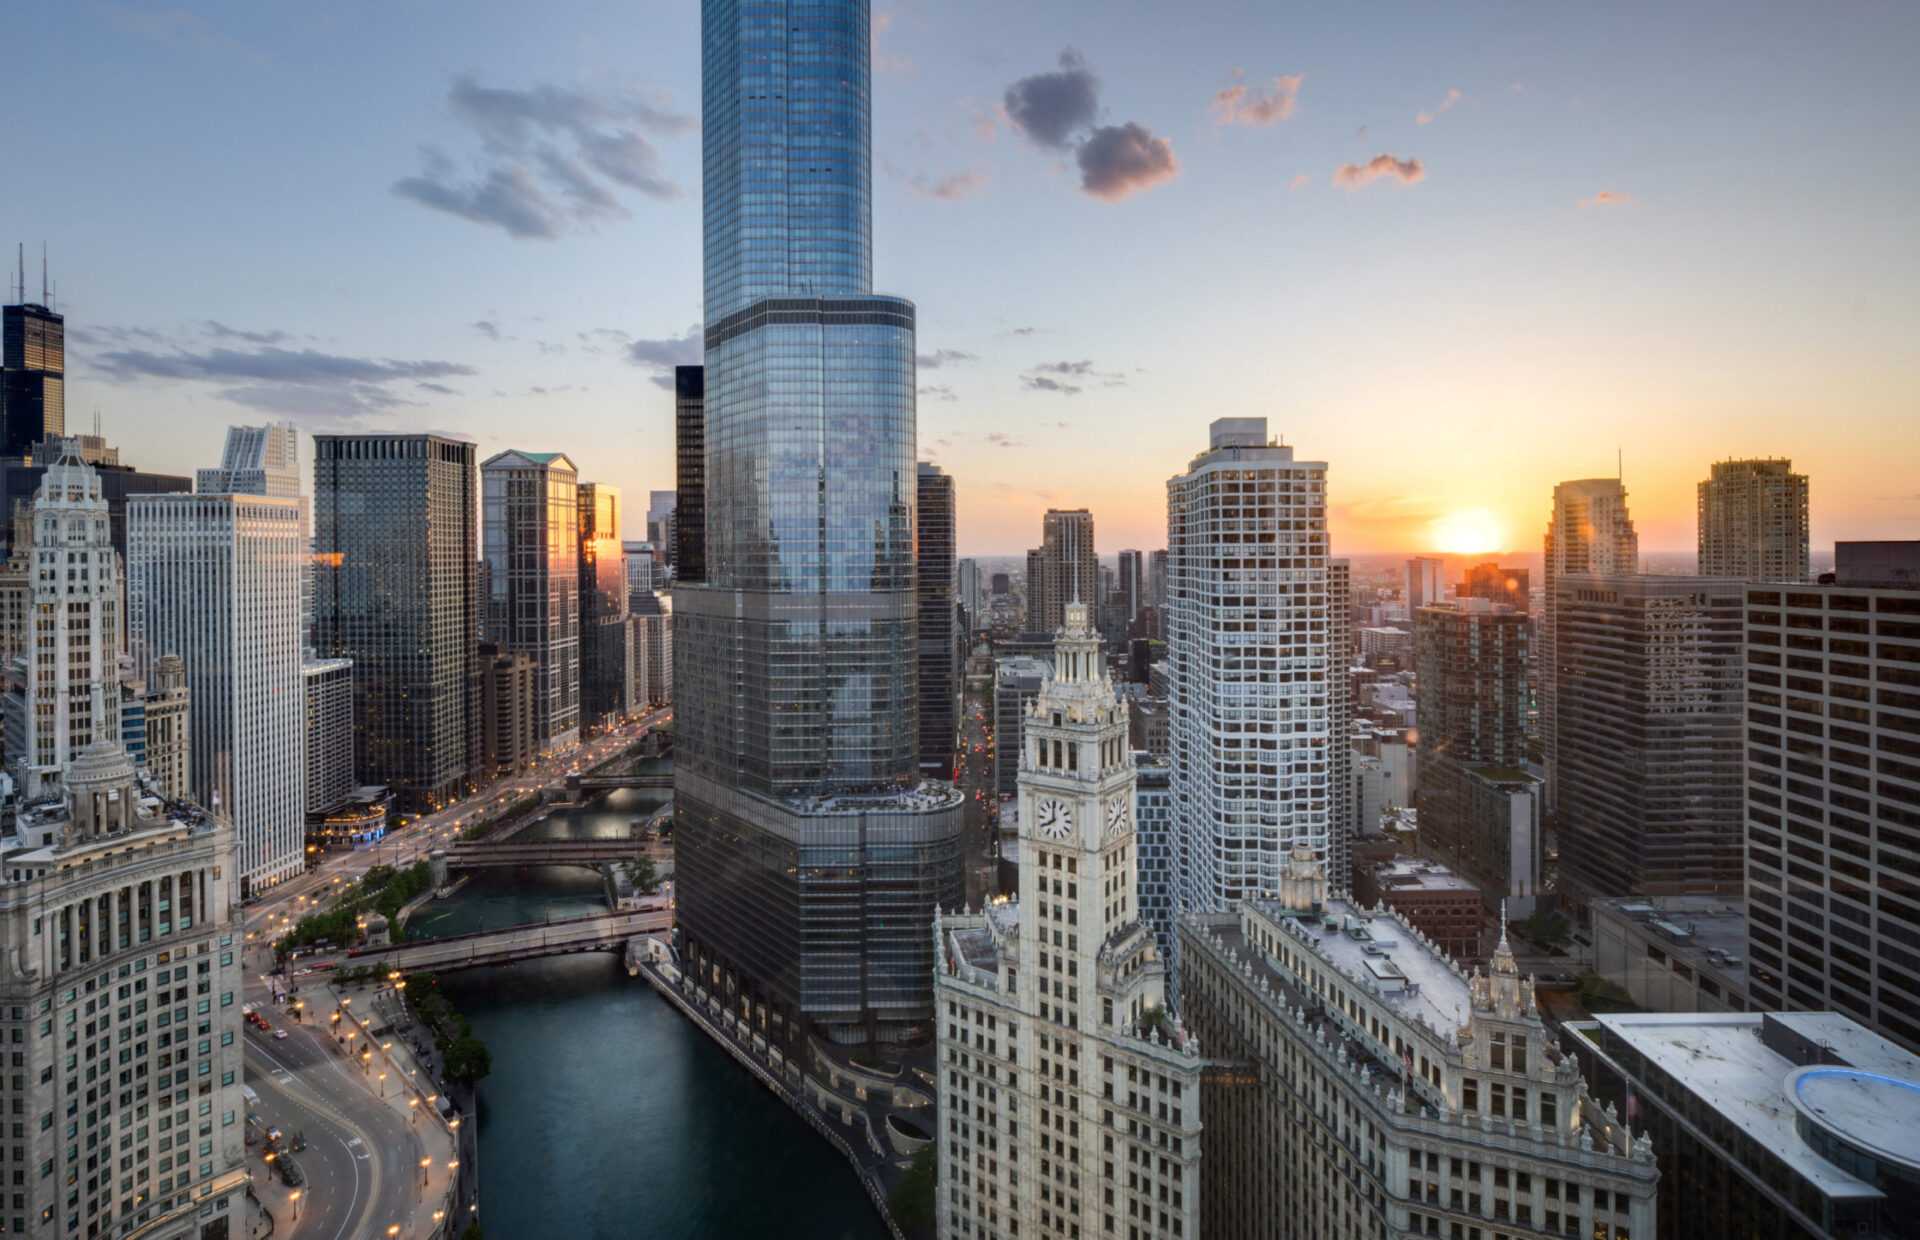 A beautiful aerial view of the city skyline of Chicago at sunset